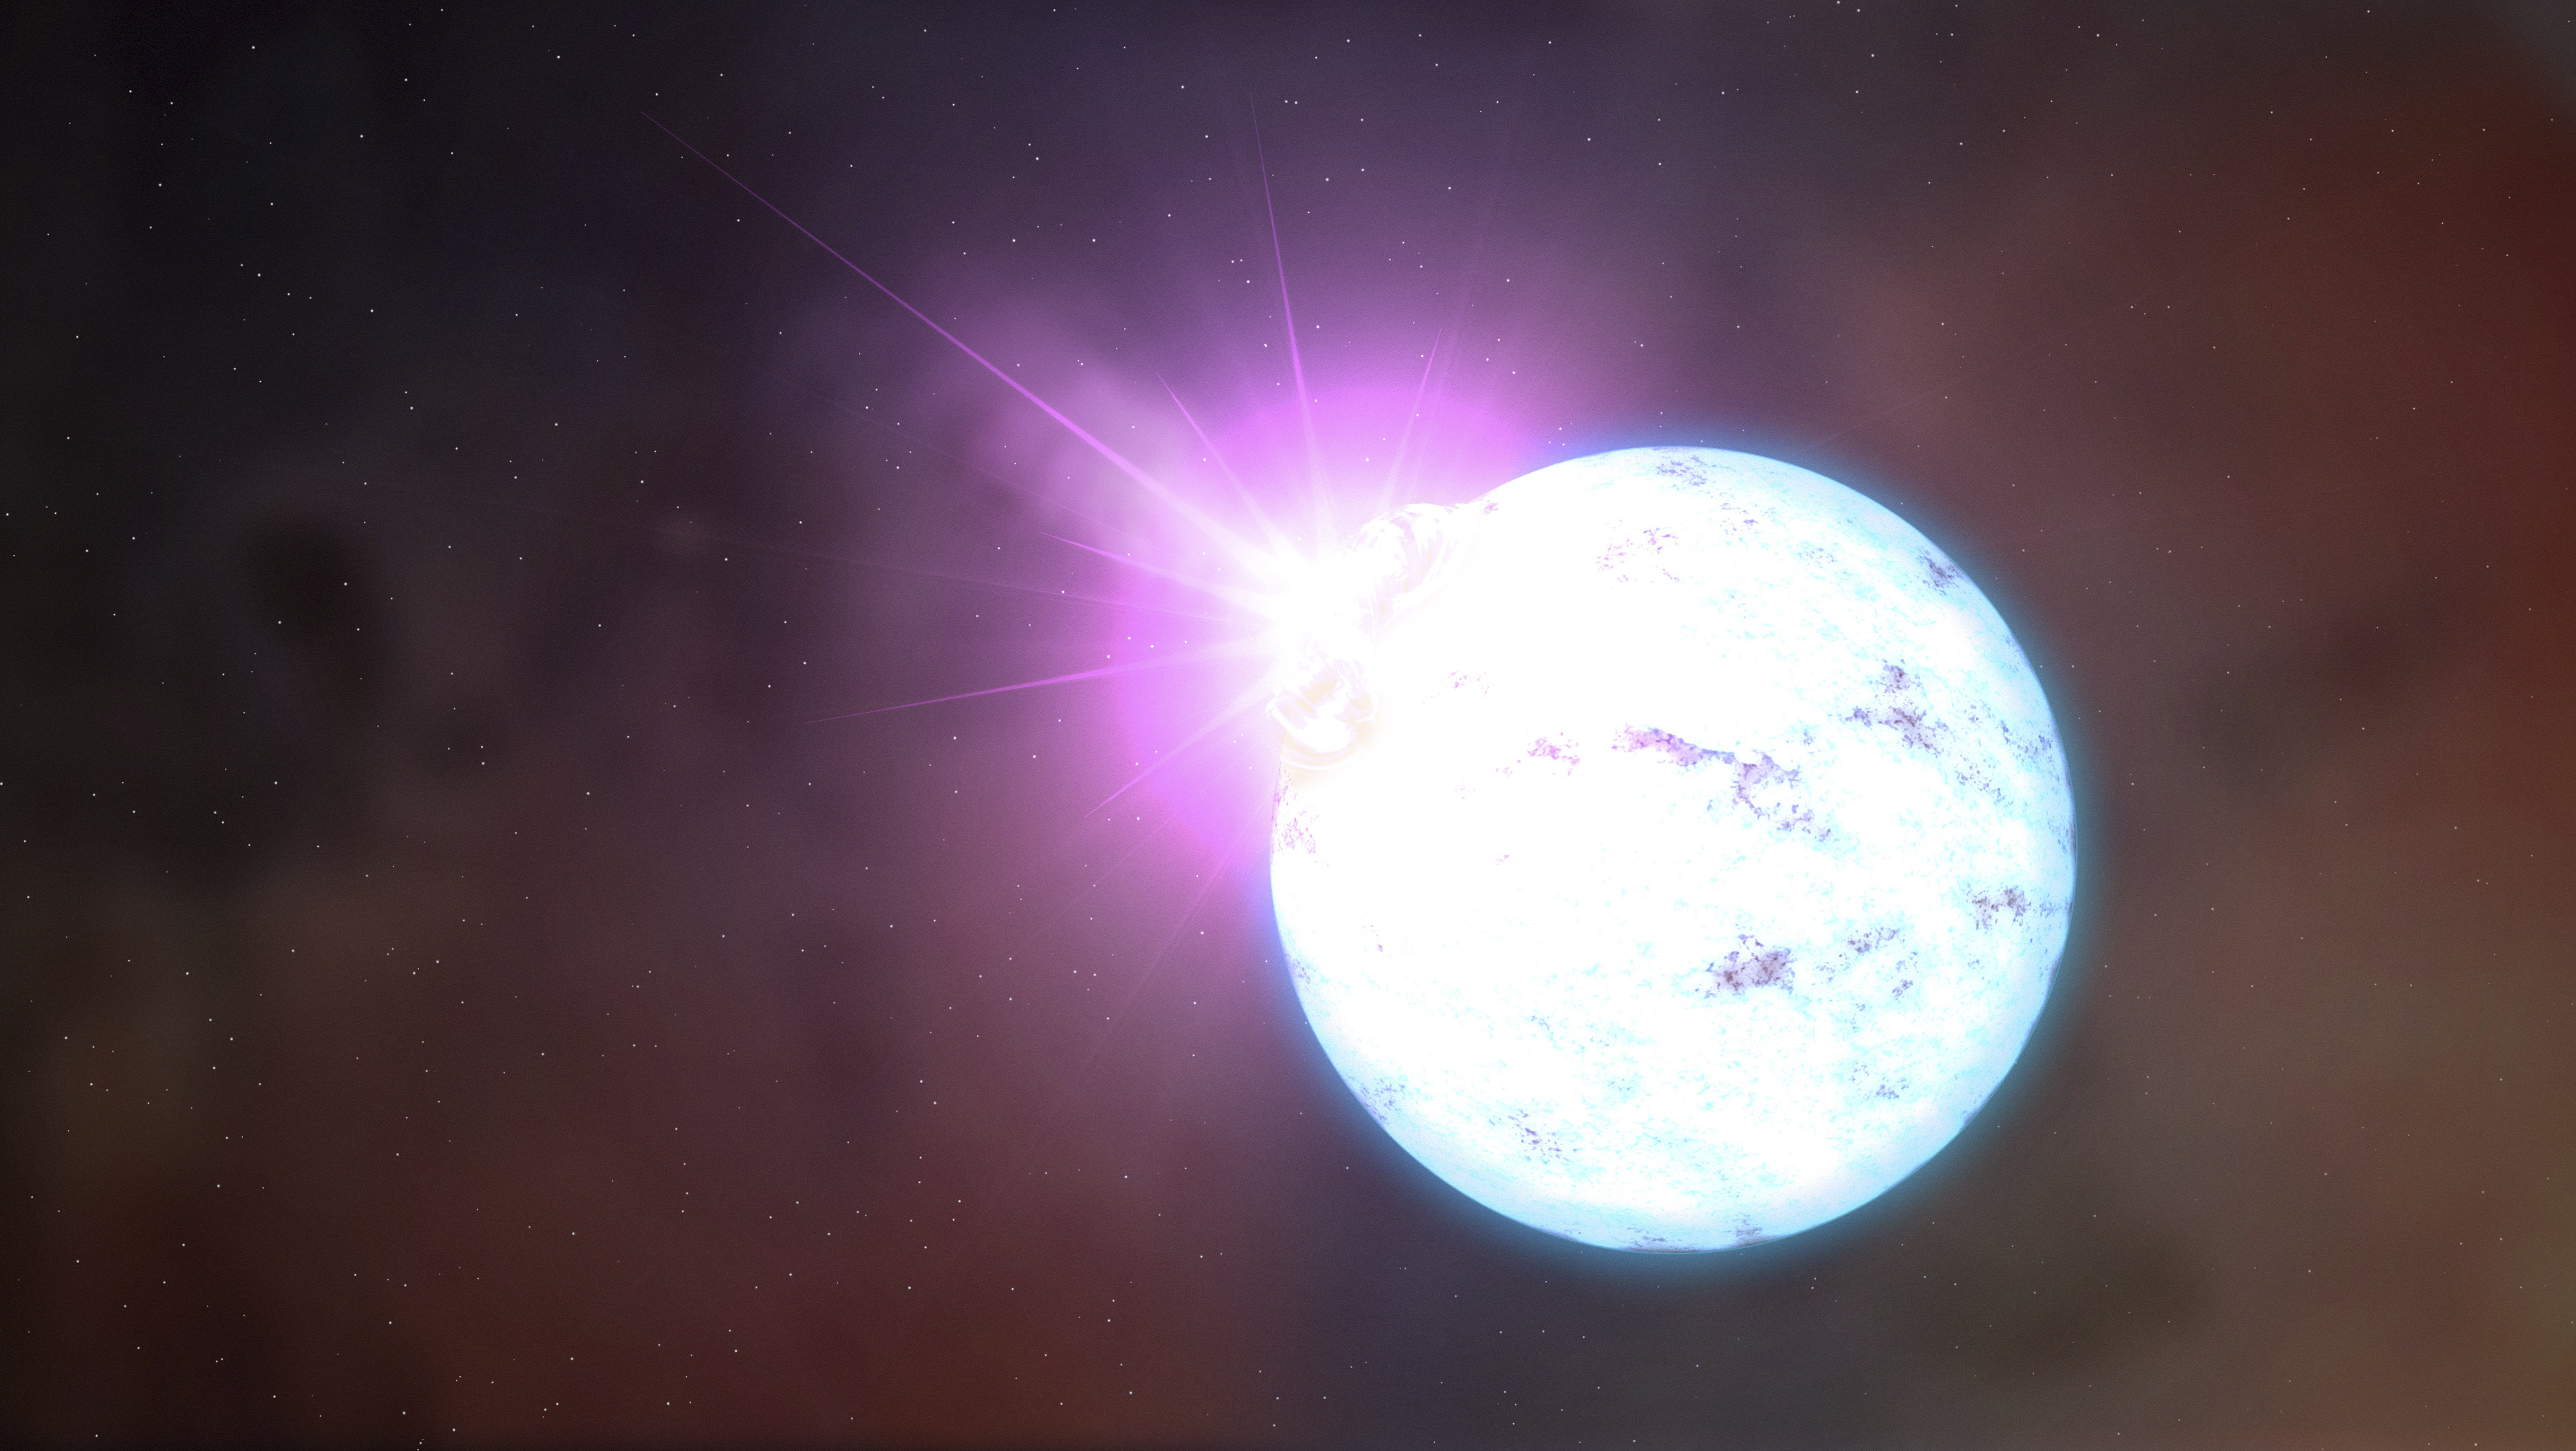 NASA handout of an artist's rendering of an outburst on a ultra-magnetic neutron star, also called a magnetar